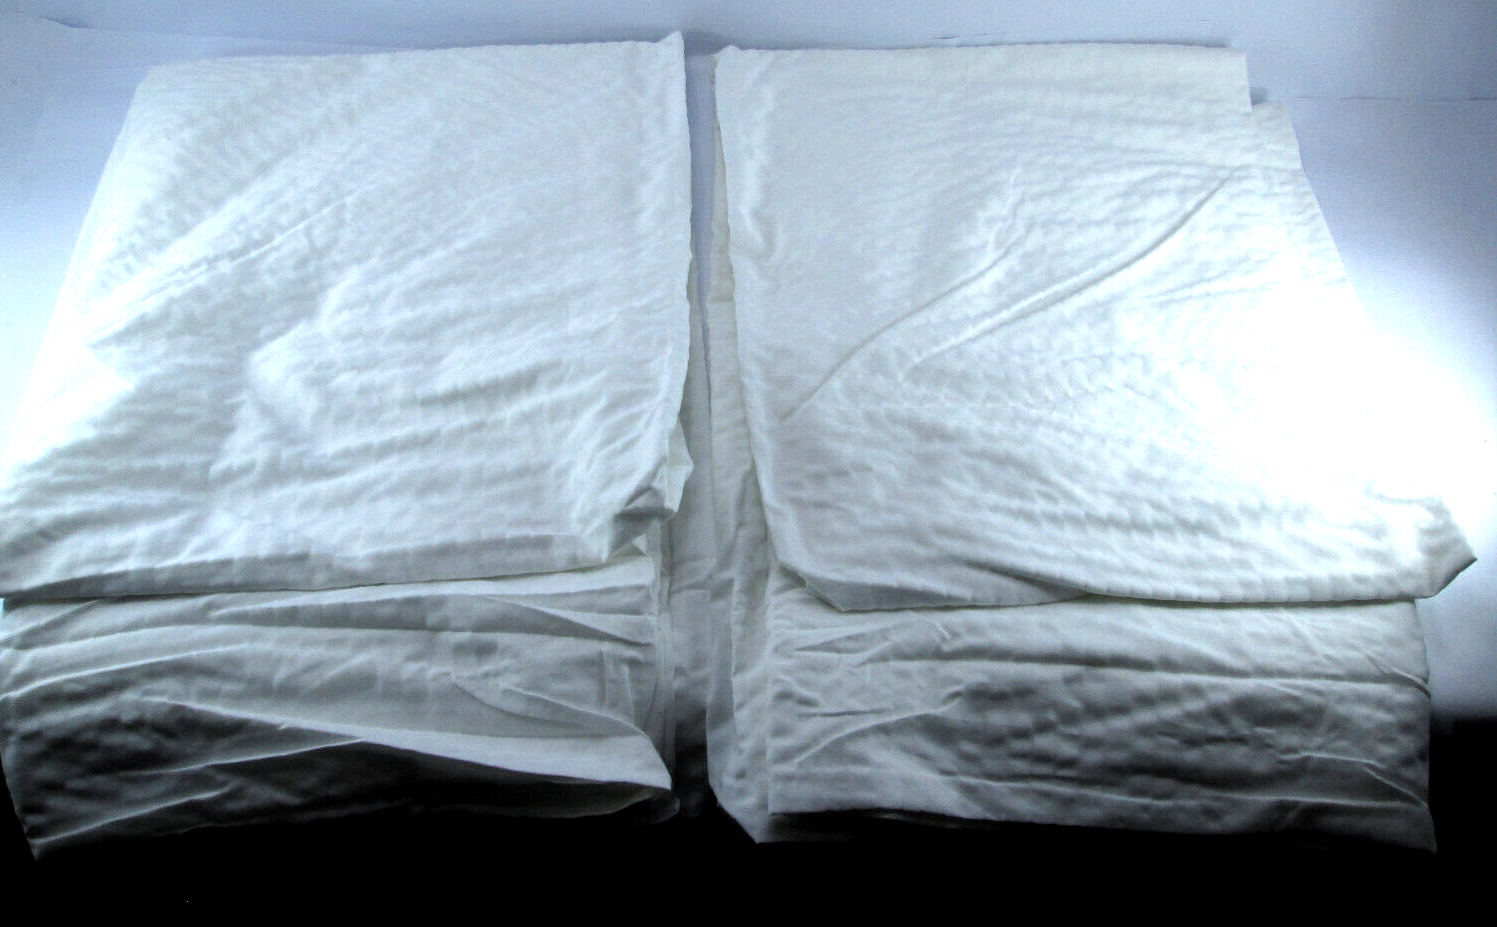 **LOT OF 2**- Standard Textile Cumulus Top Cover Flat Sheet Full / Queen White Standard Textile